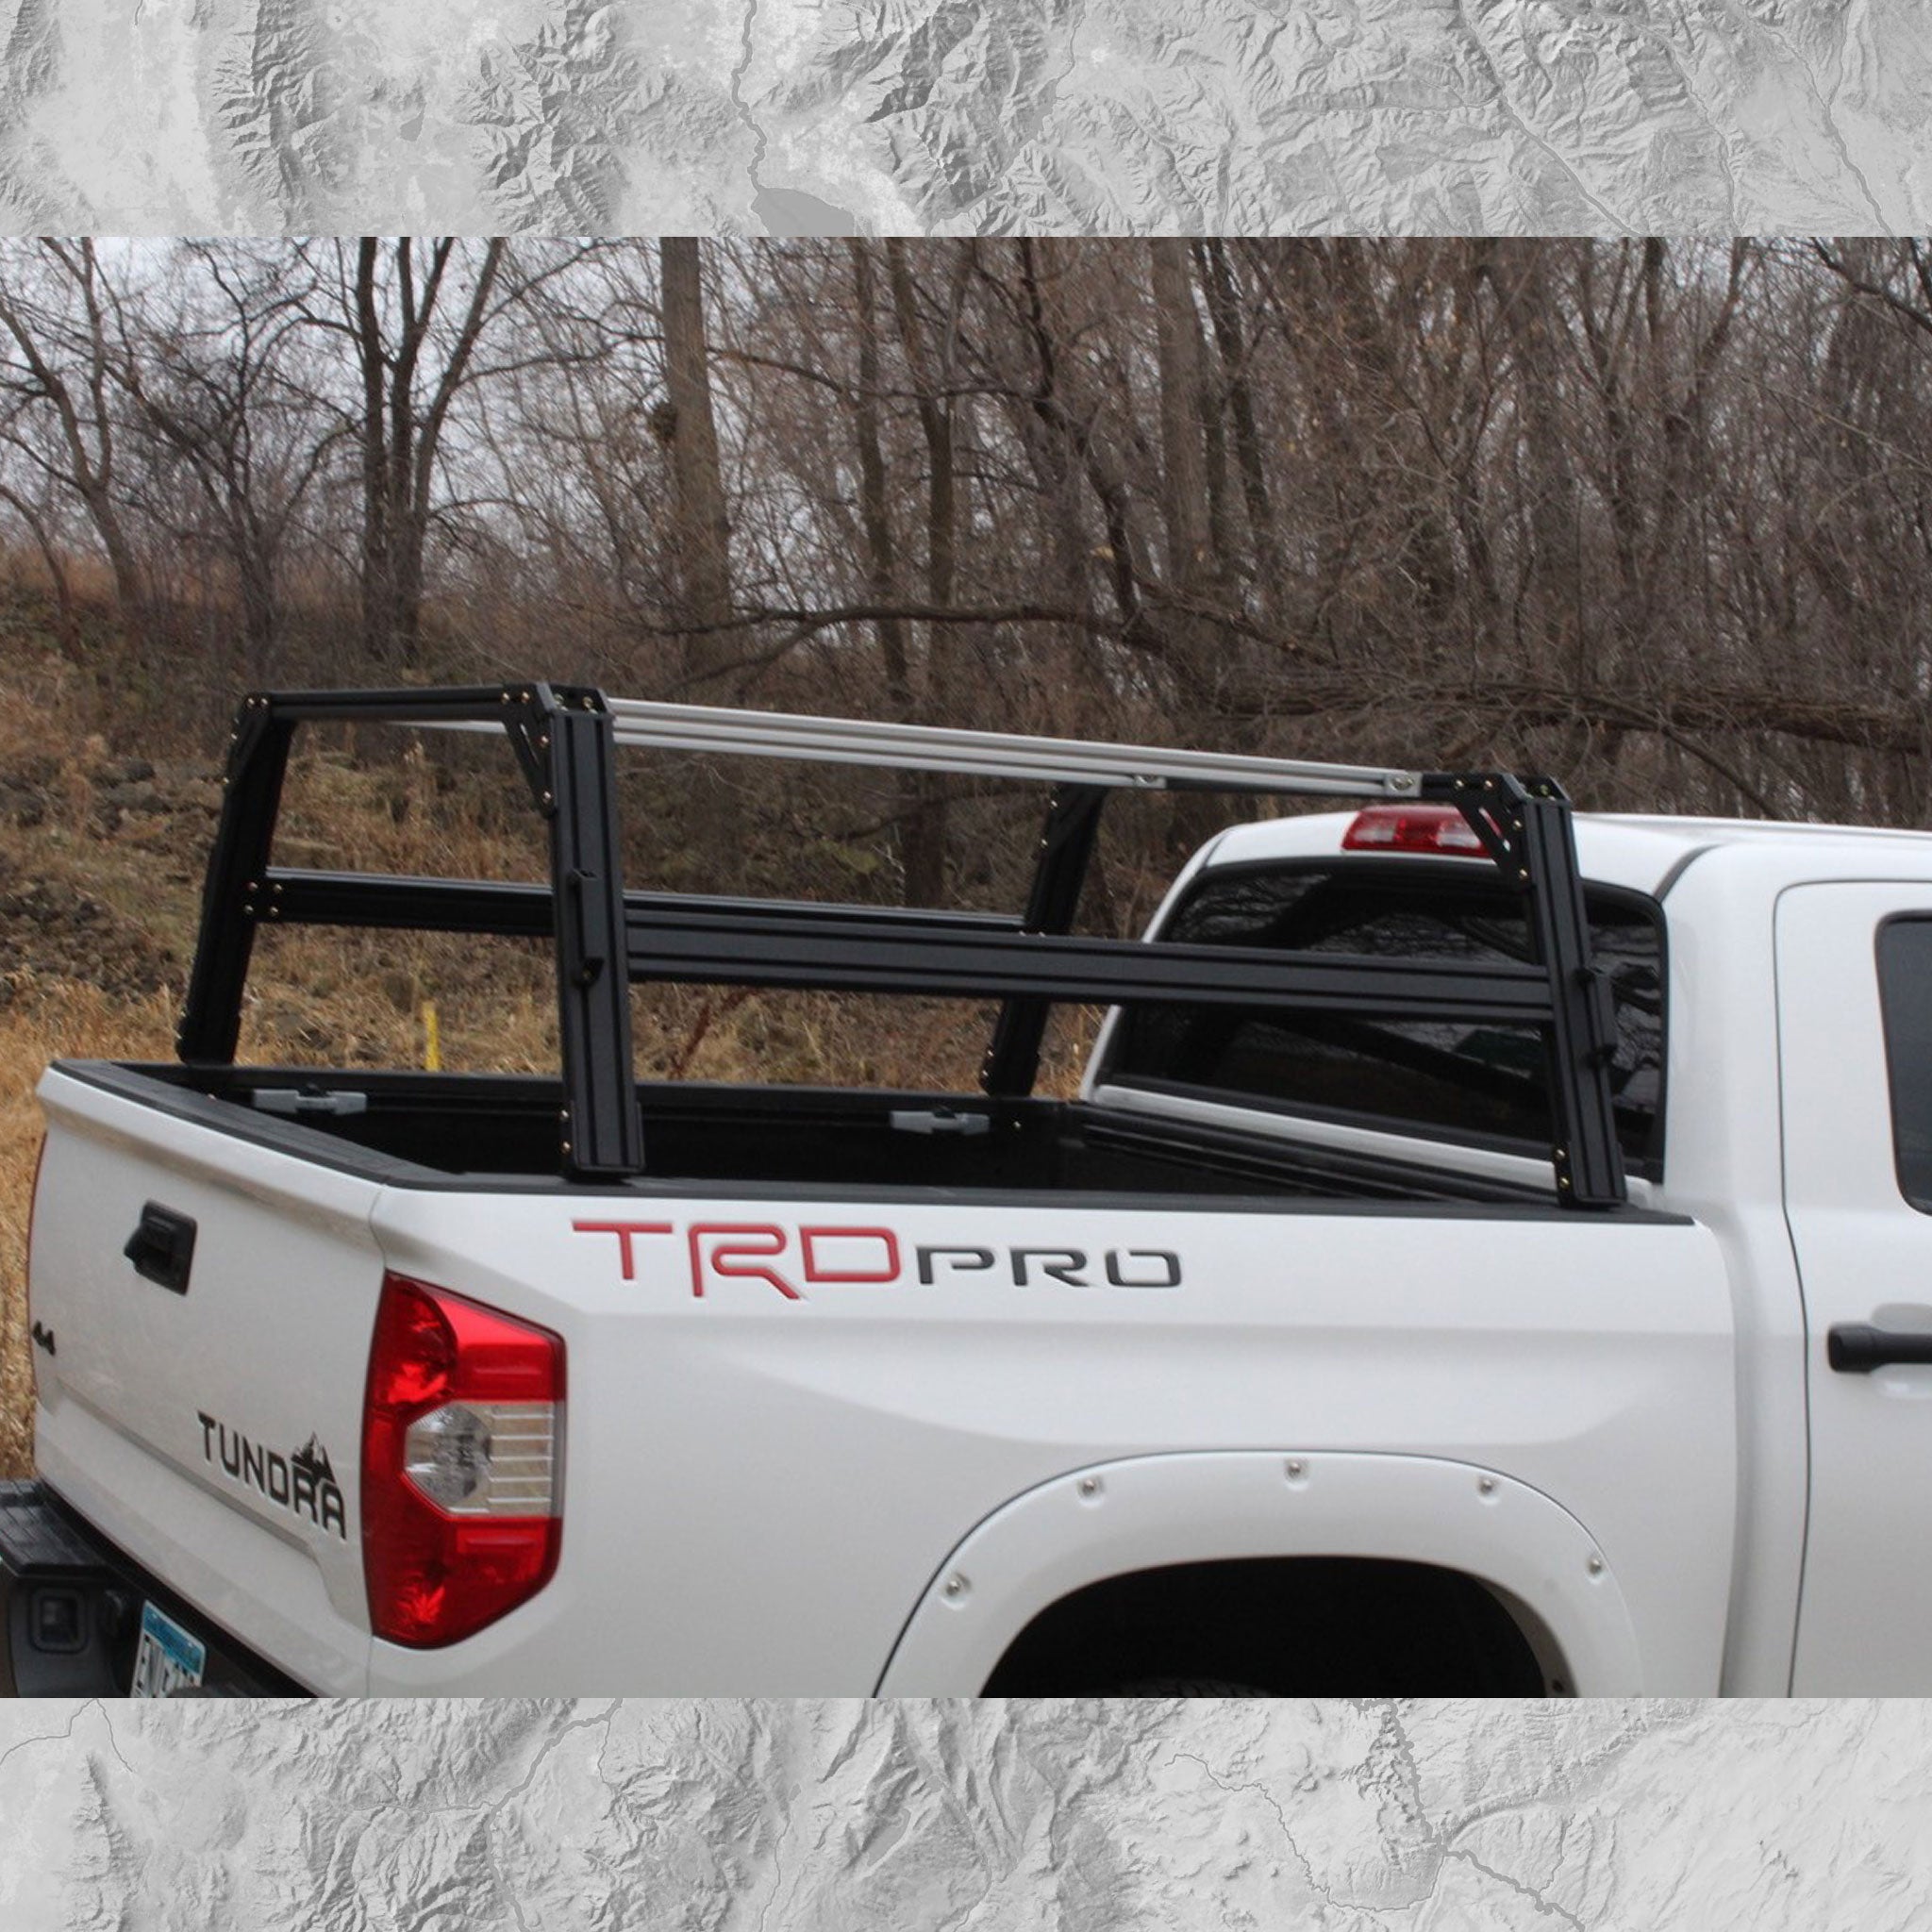 Toyota Tundra with basic Xtrusion Overland XTR1 Bed Rack and Off-Road corner plates.